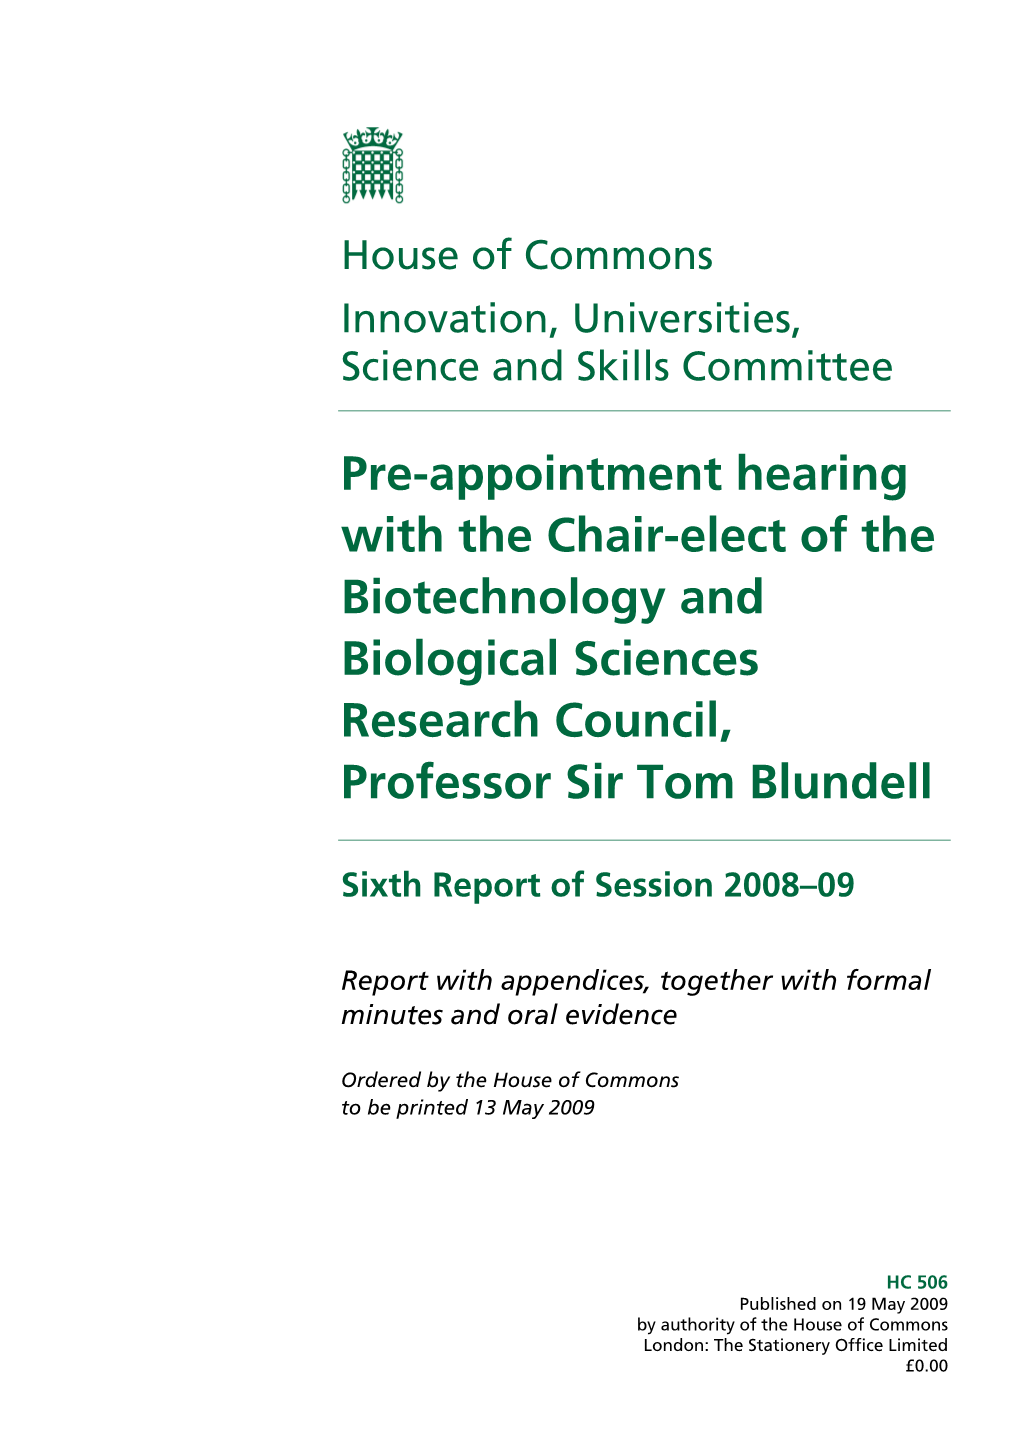 Pre-Appointment Hearing with the Chair-Elect of the Biotechnology and Biological Sciences Research Council, Professor Sir Tom Blundell